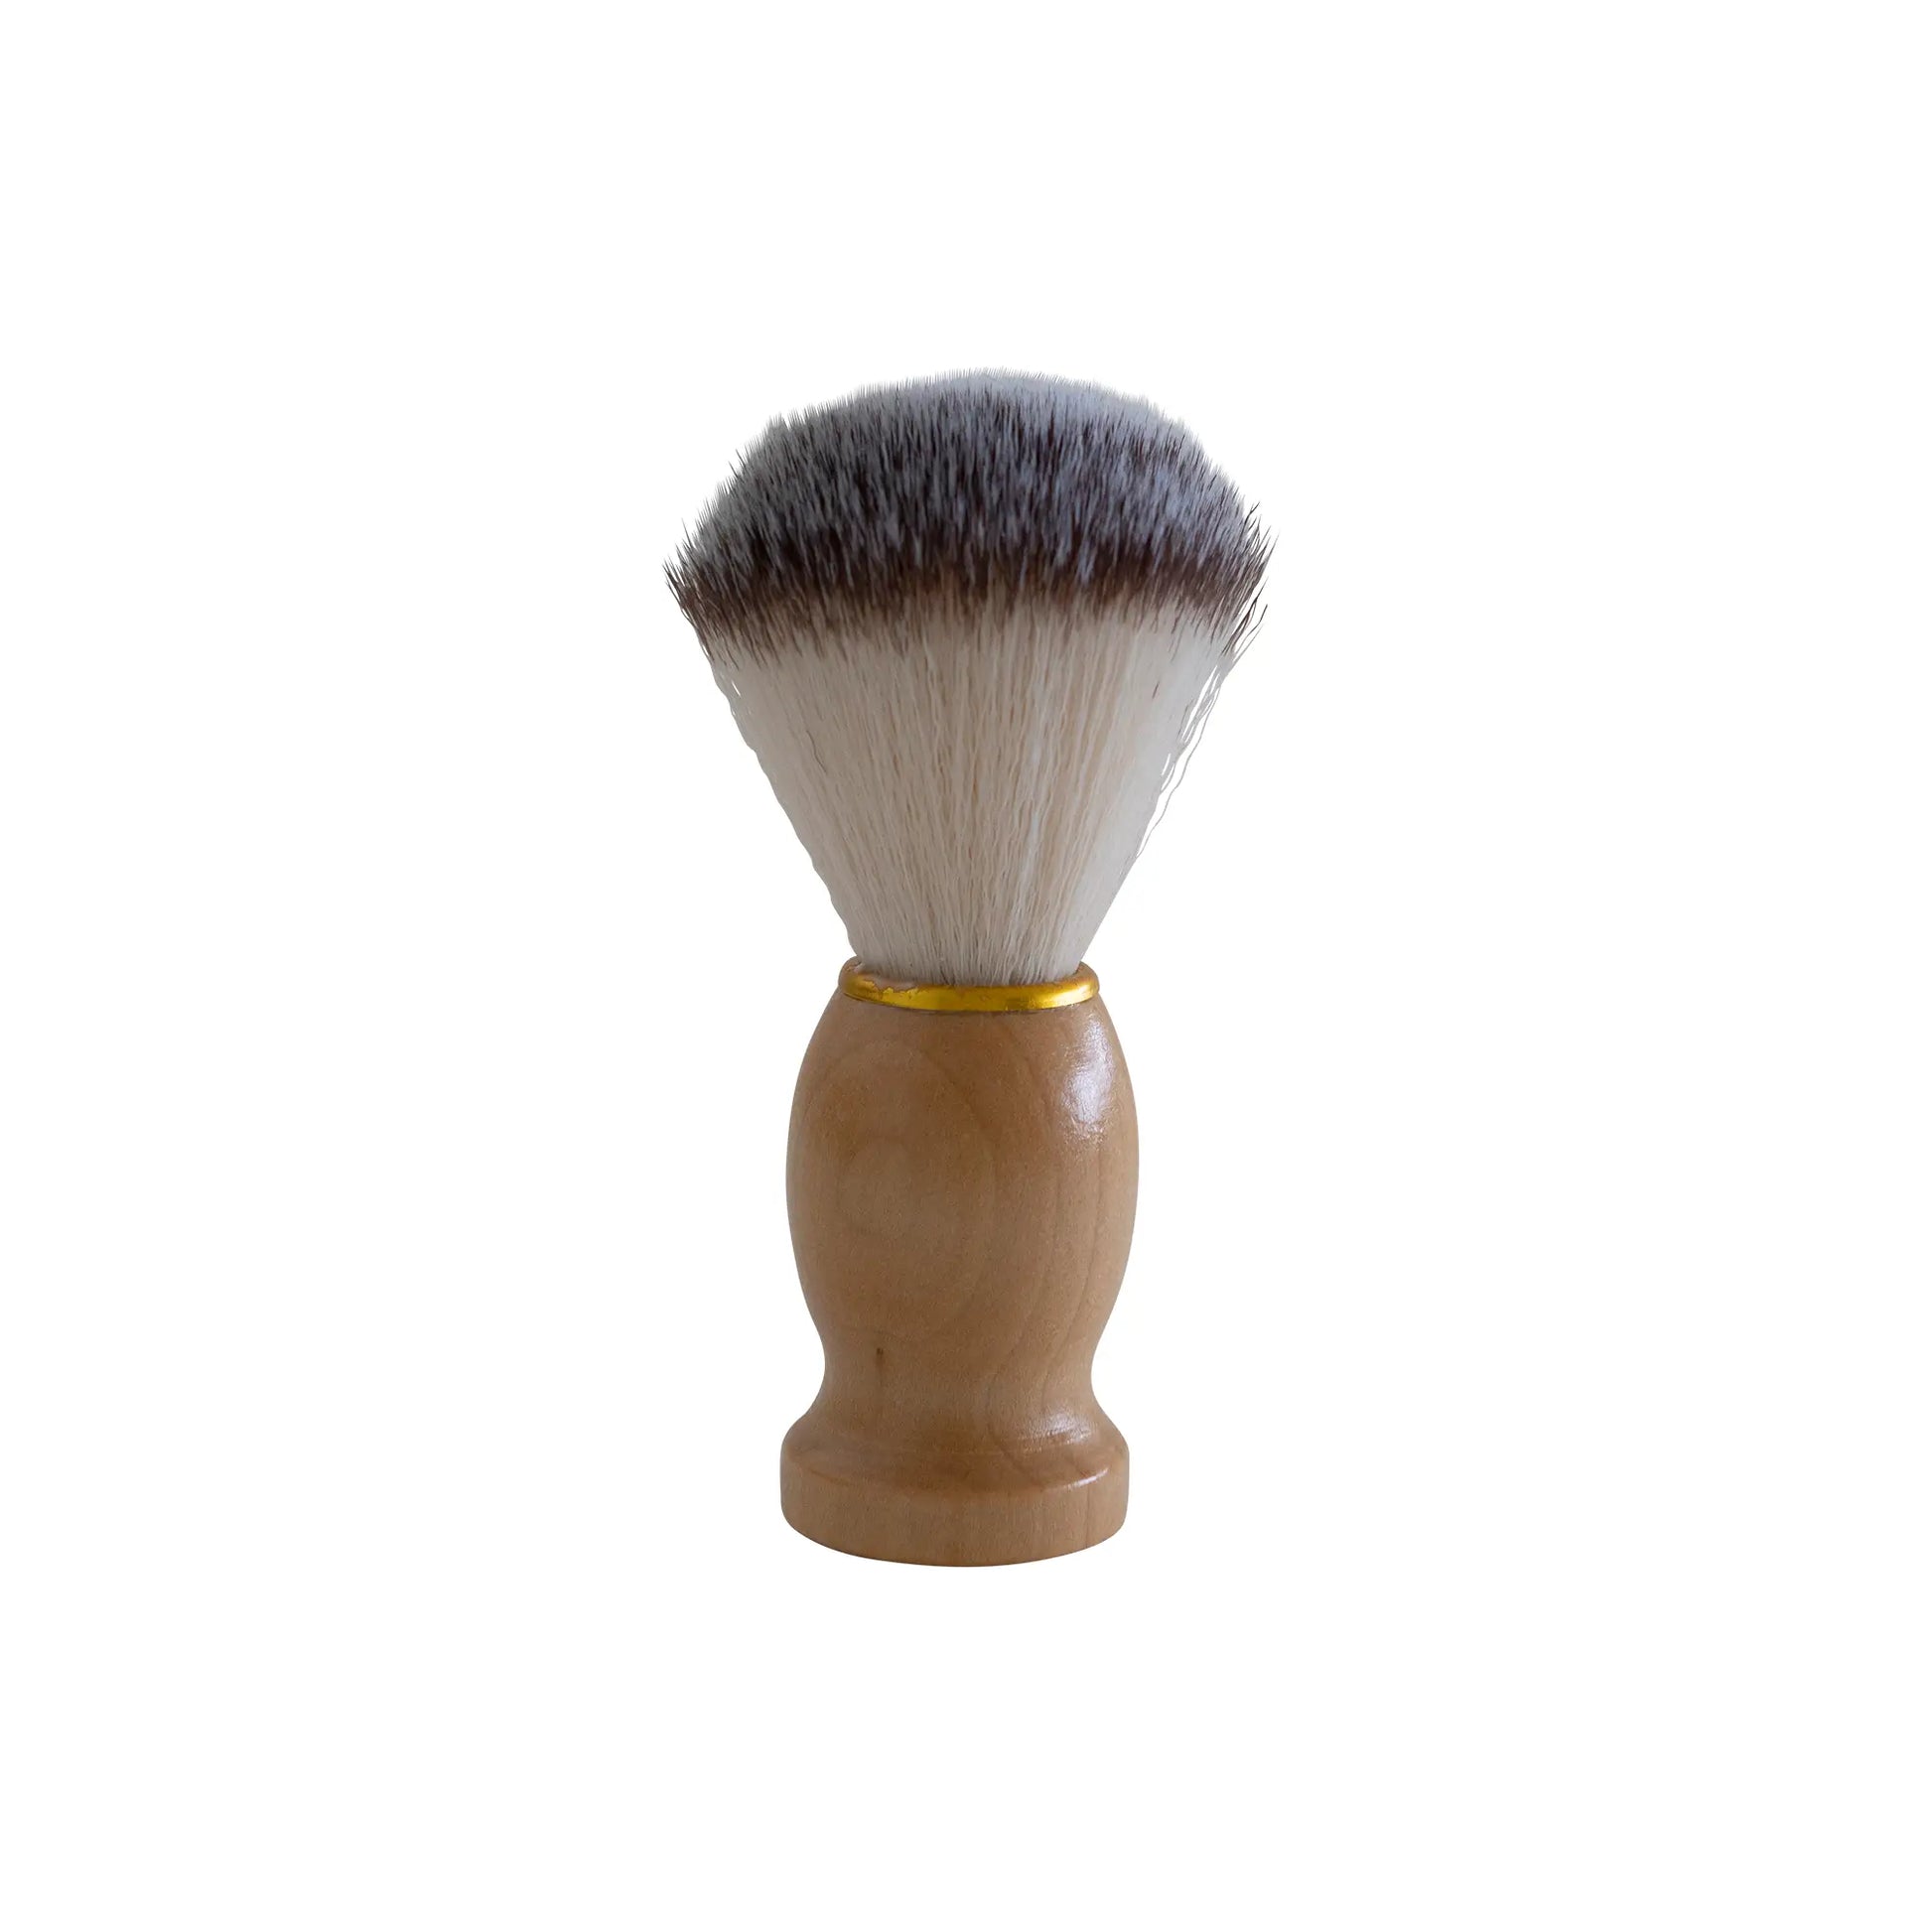 Cruisin Organics Beard Shave Wooden Brush is designed to create a rich lather, providing a smooth and comfortable shave. With its firm, hourglass shape, it ensures comfortable use. The brush's excellent soap and water retention result in a luxurious shaving experience.